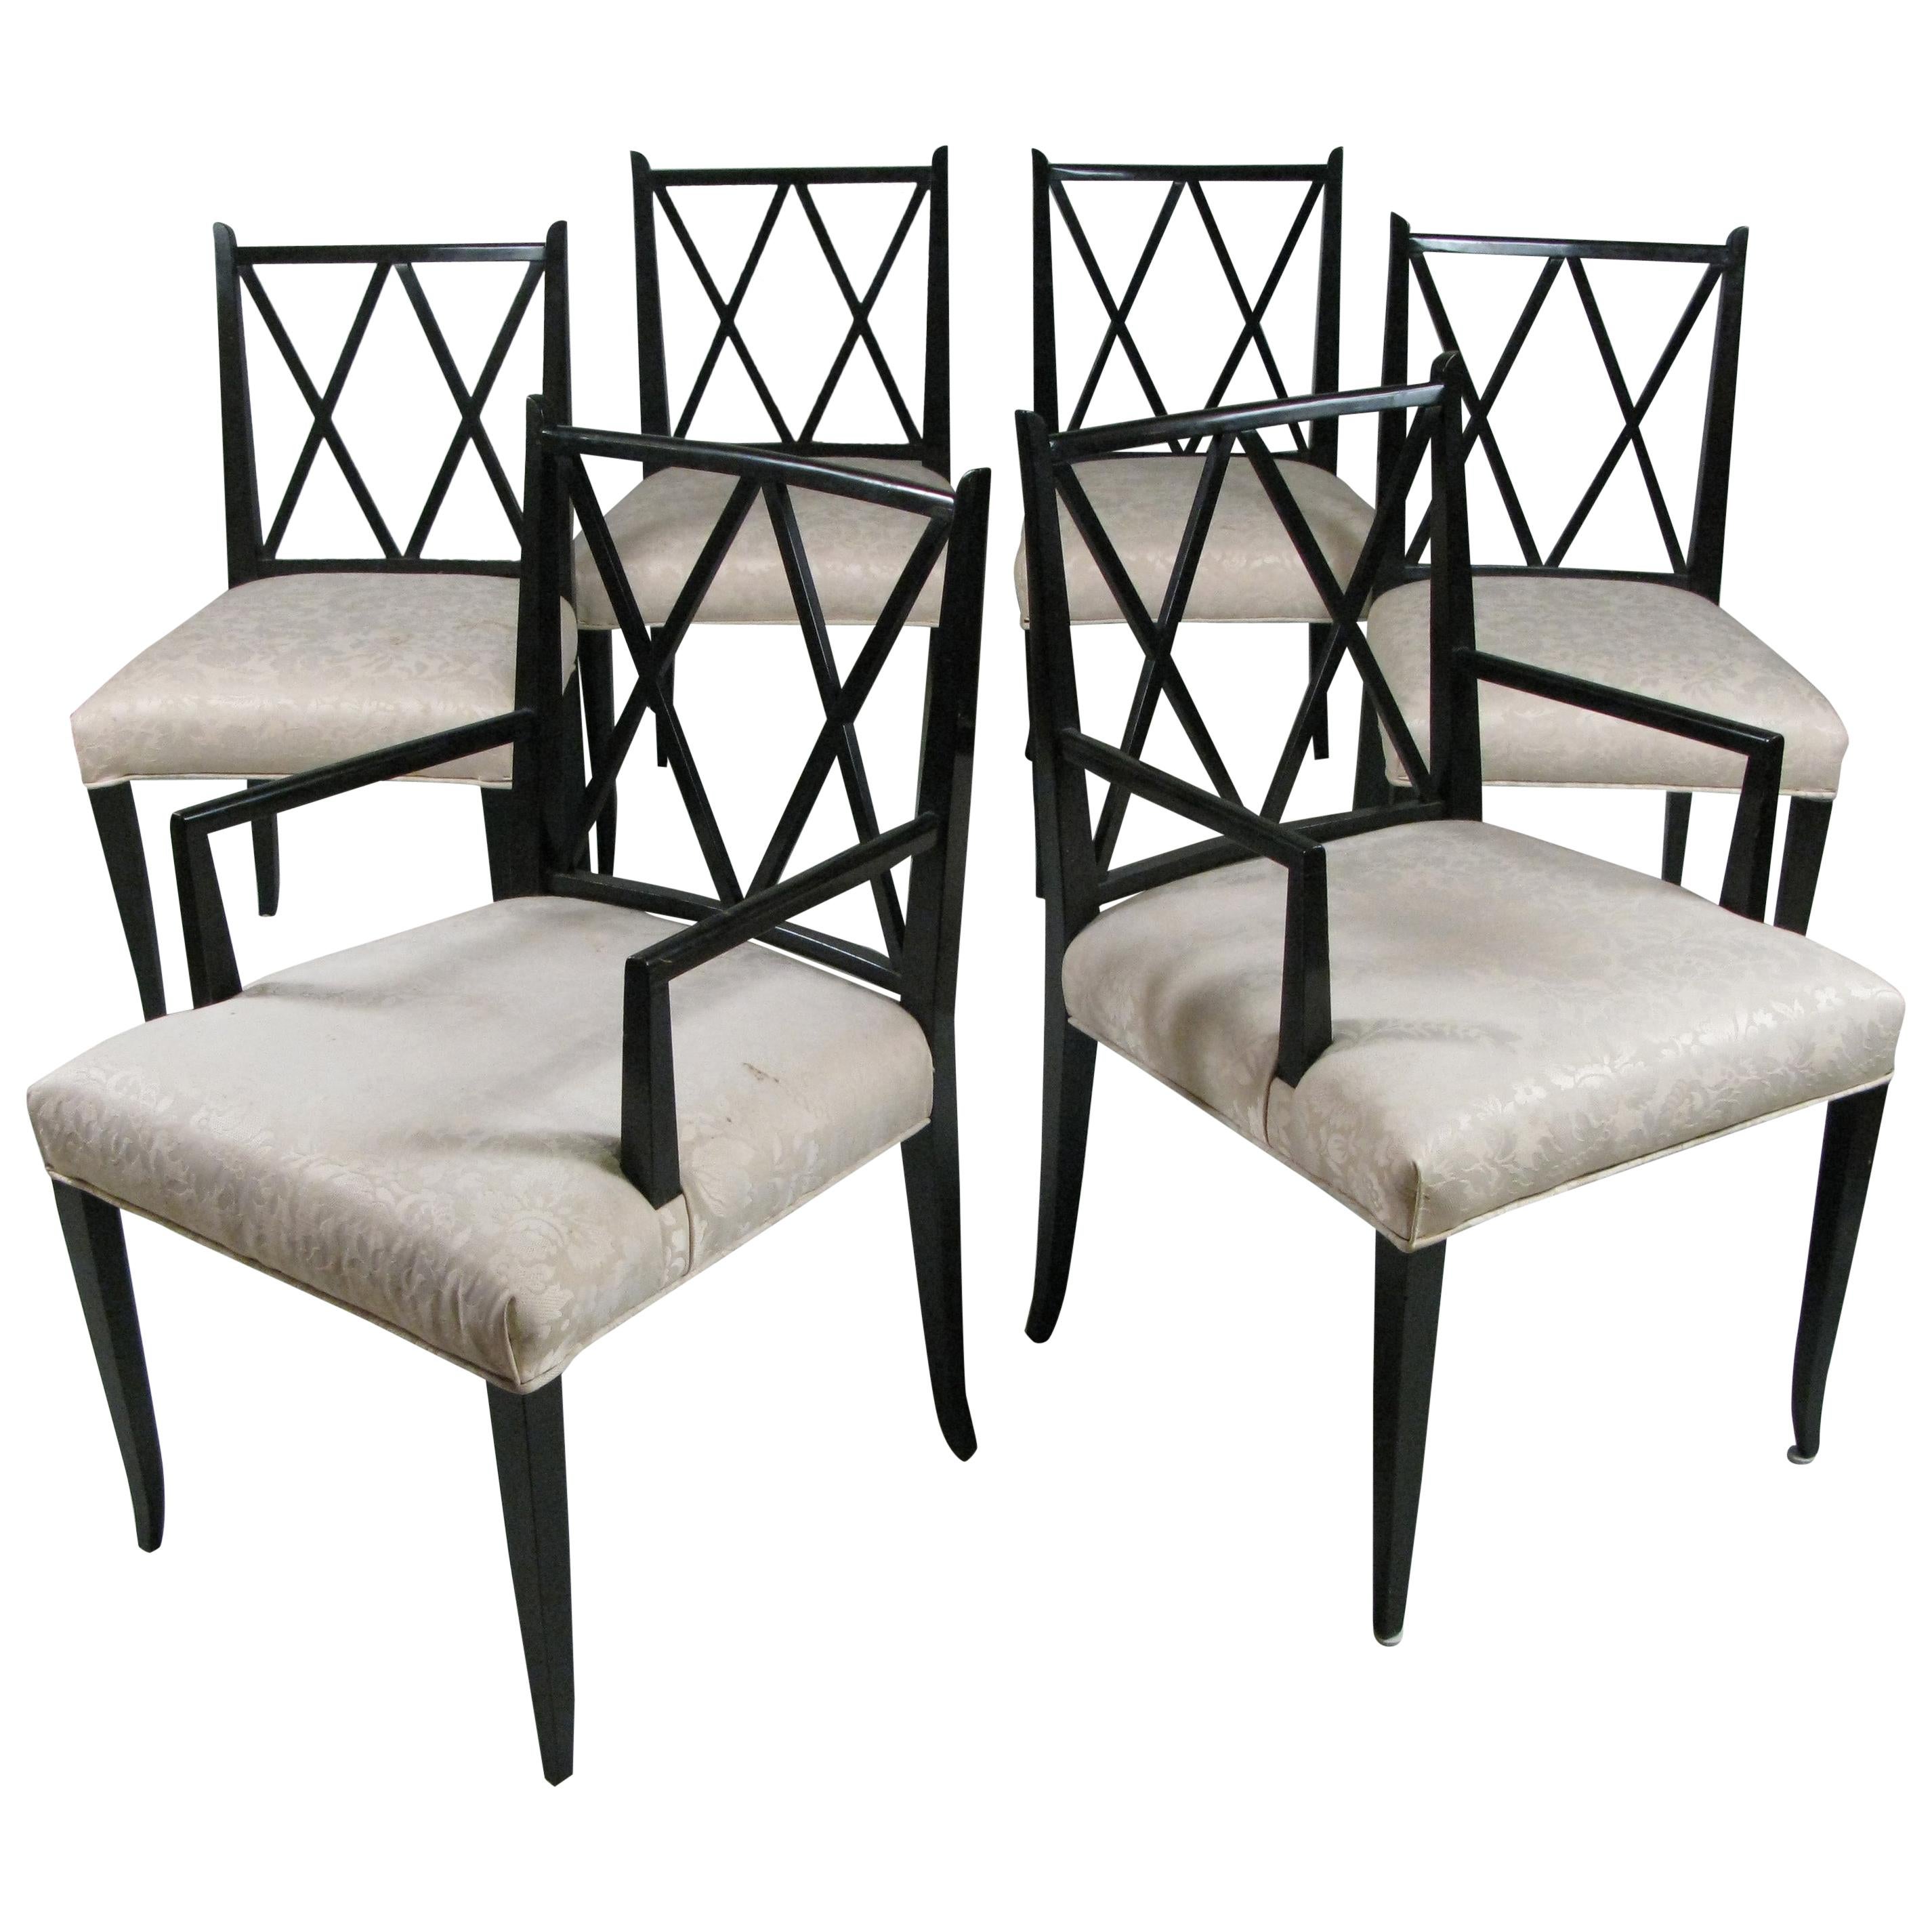 Set of Six 'Double X' Dining Chairs by Tommi Parzinger for Parzinger Originals